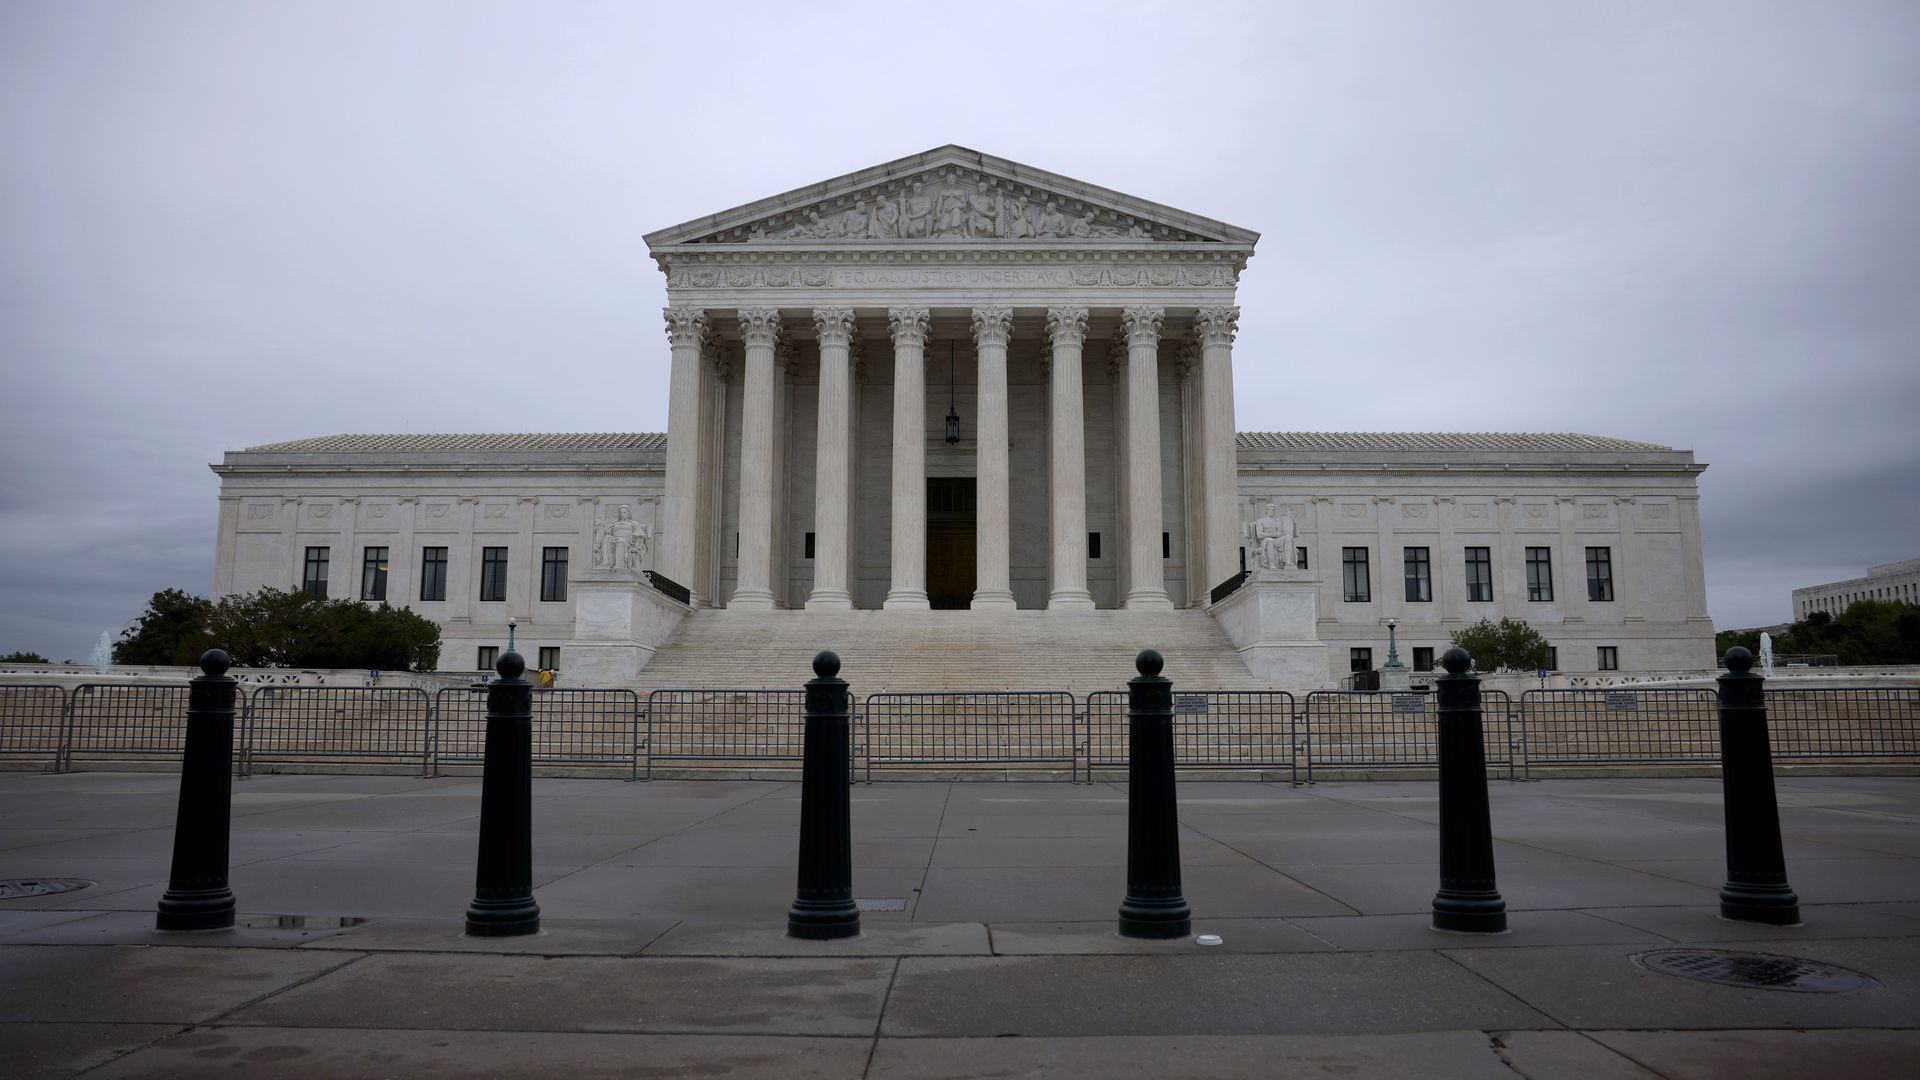 Photo of the front exterior of the U.S. Supreme Court building